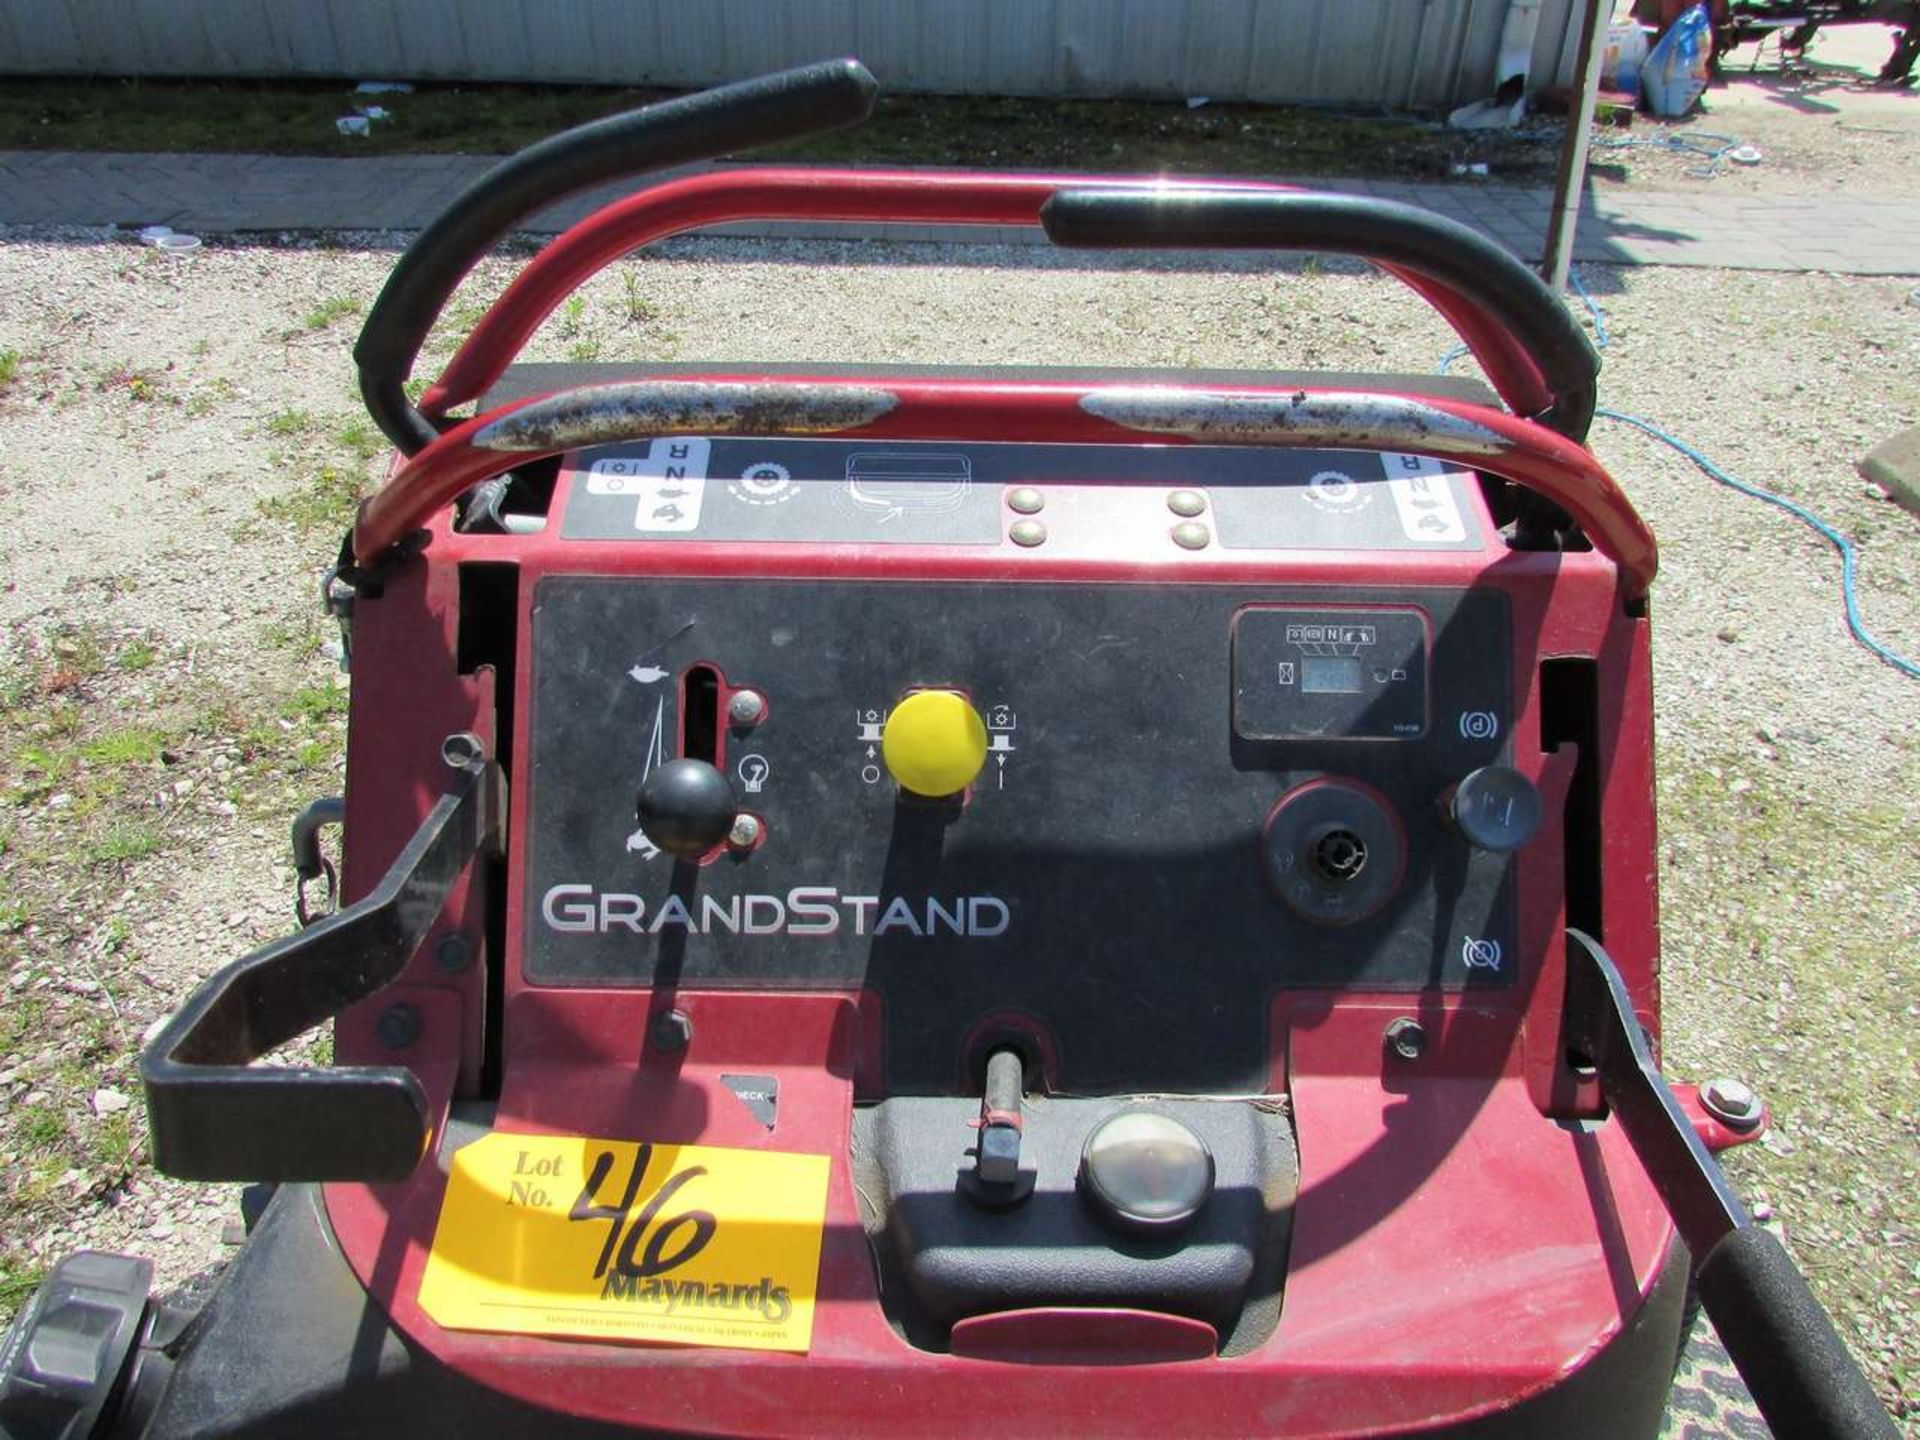 2014 Toro 74549 Grand Stand Walk-Behind Type Commercial Lawn Mower - Image 9 of 9